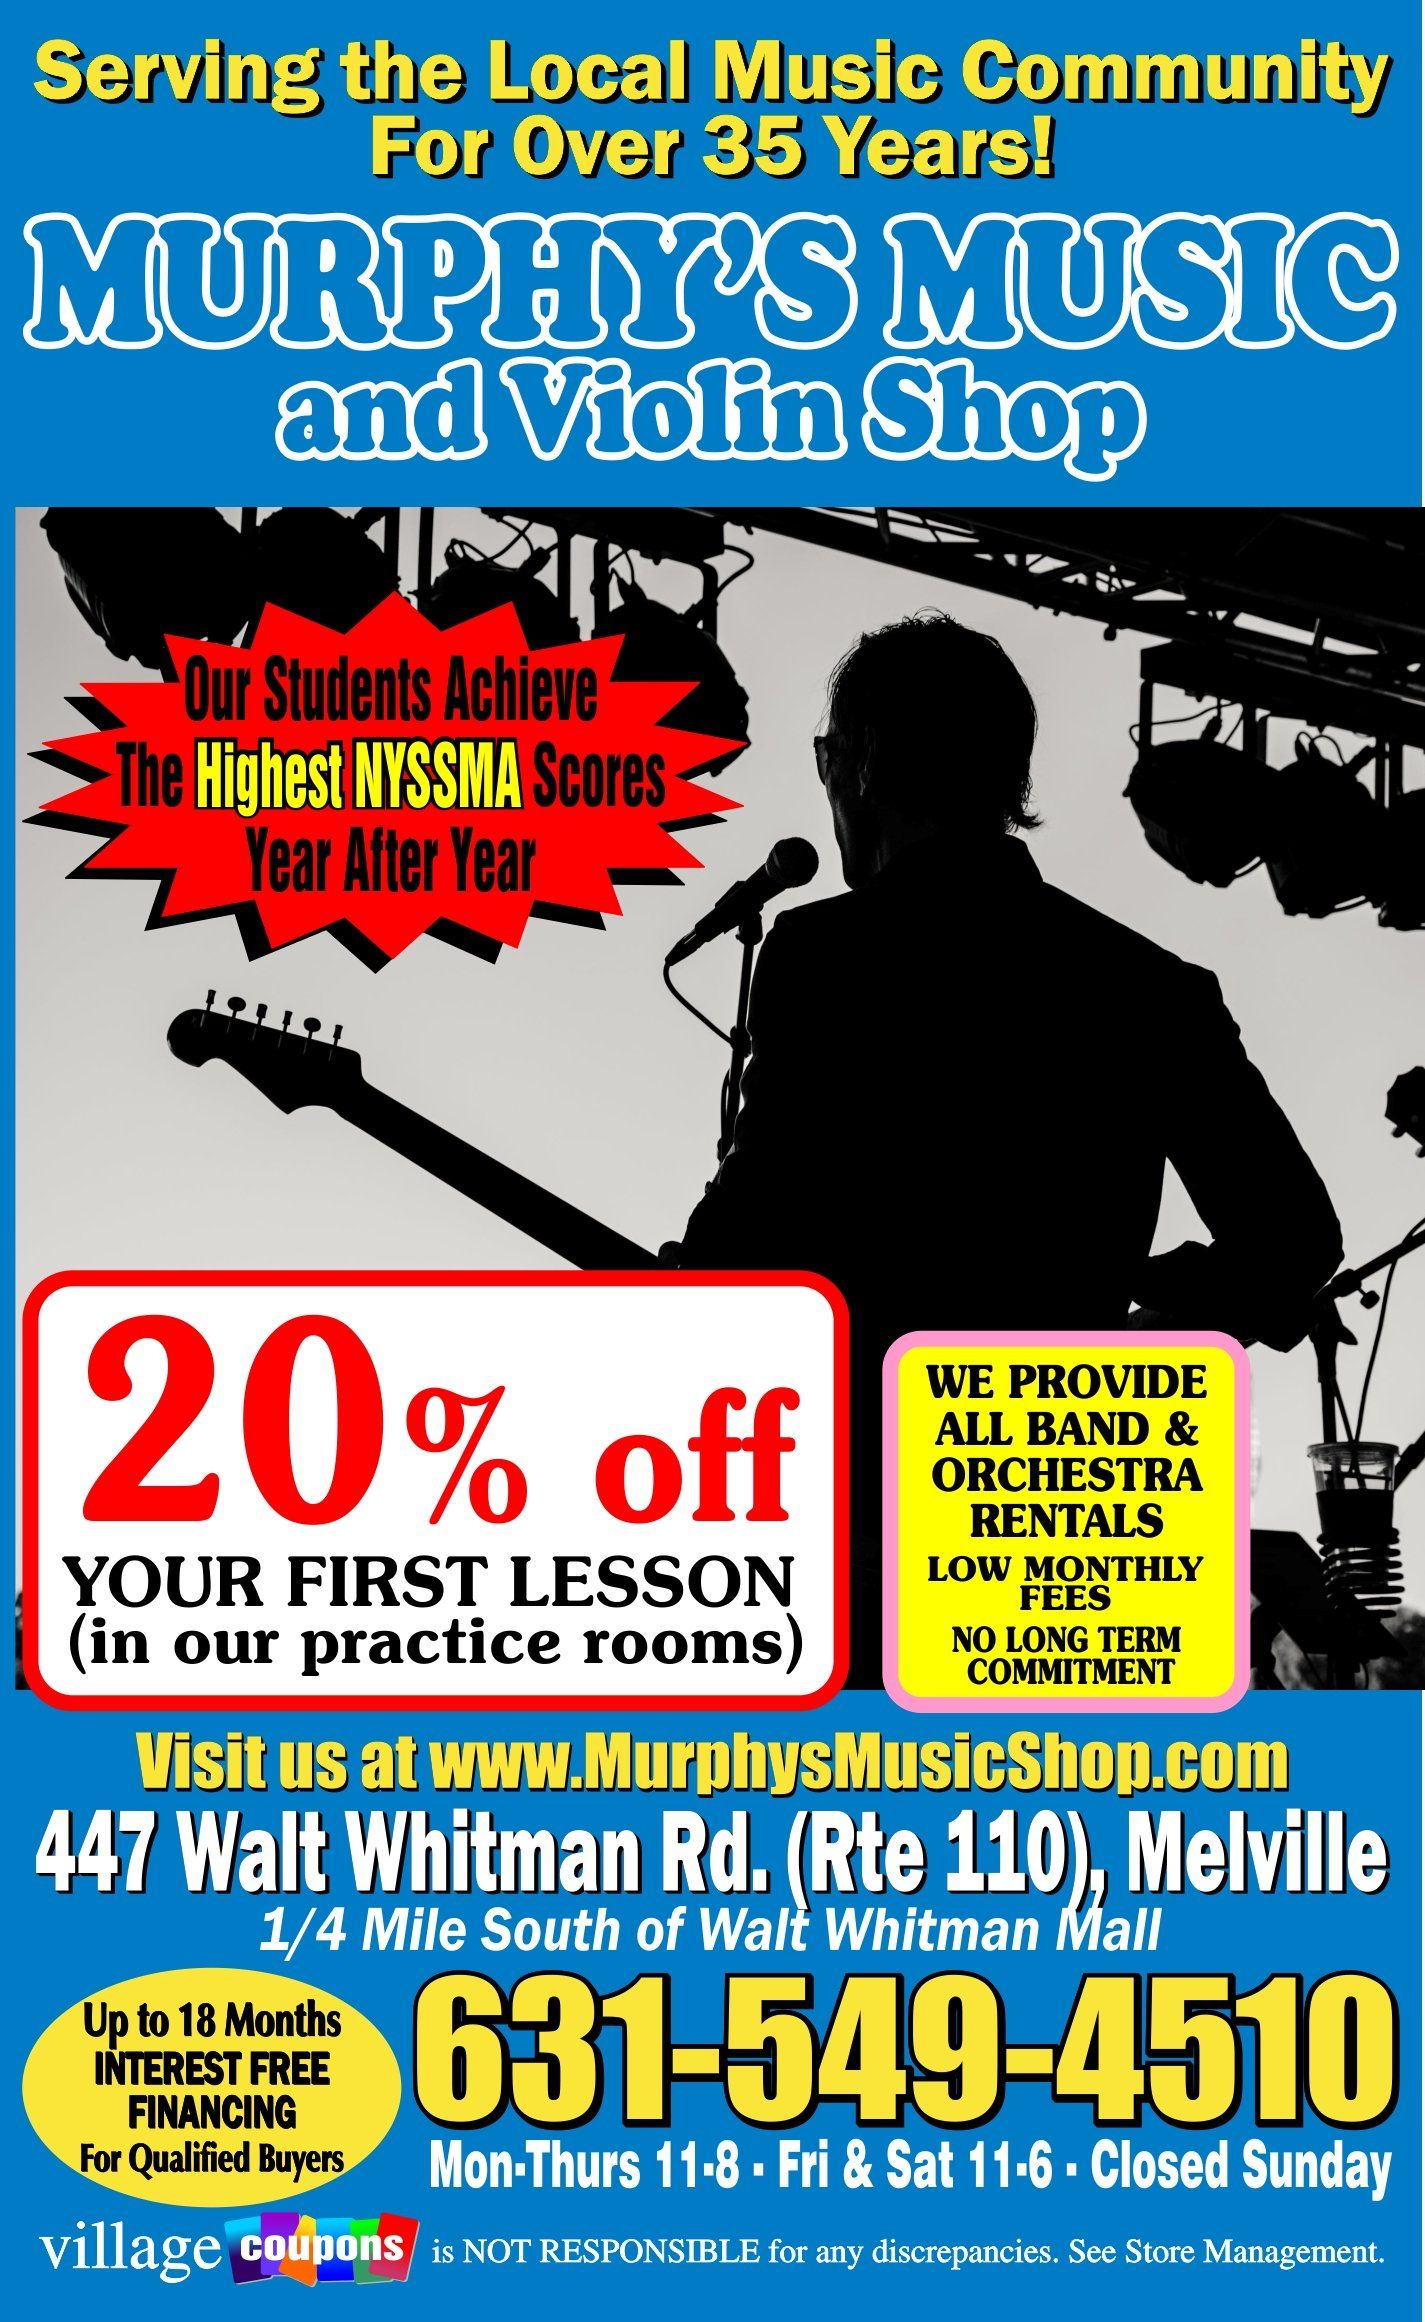 An advertisement for murphy 's music and violin shop